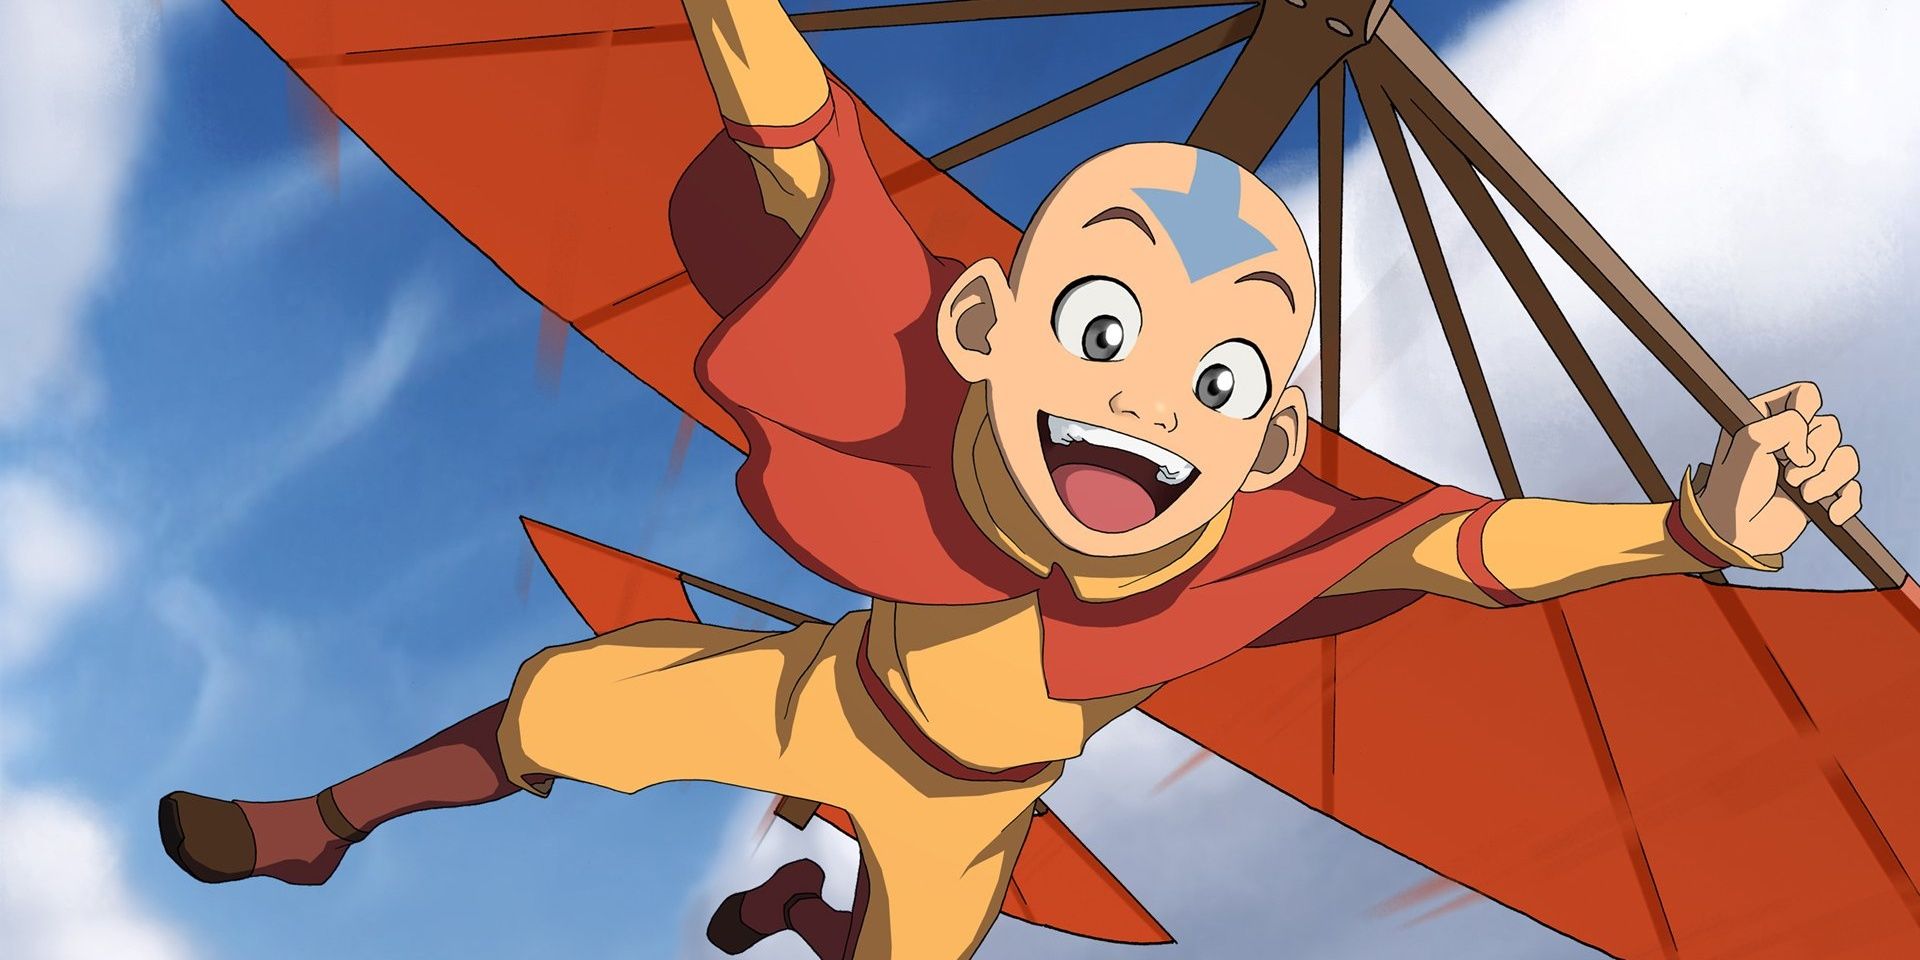 Aang from Avatar the Last Airbender gliding in the sky